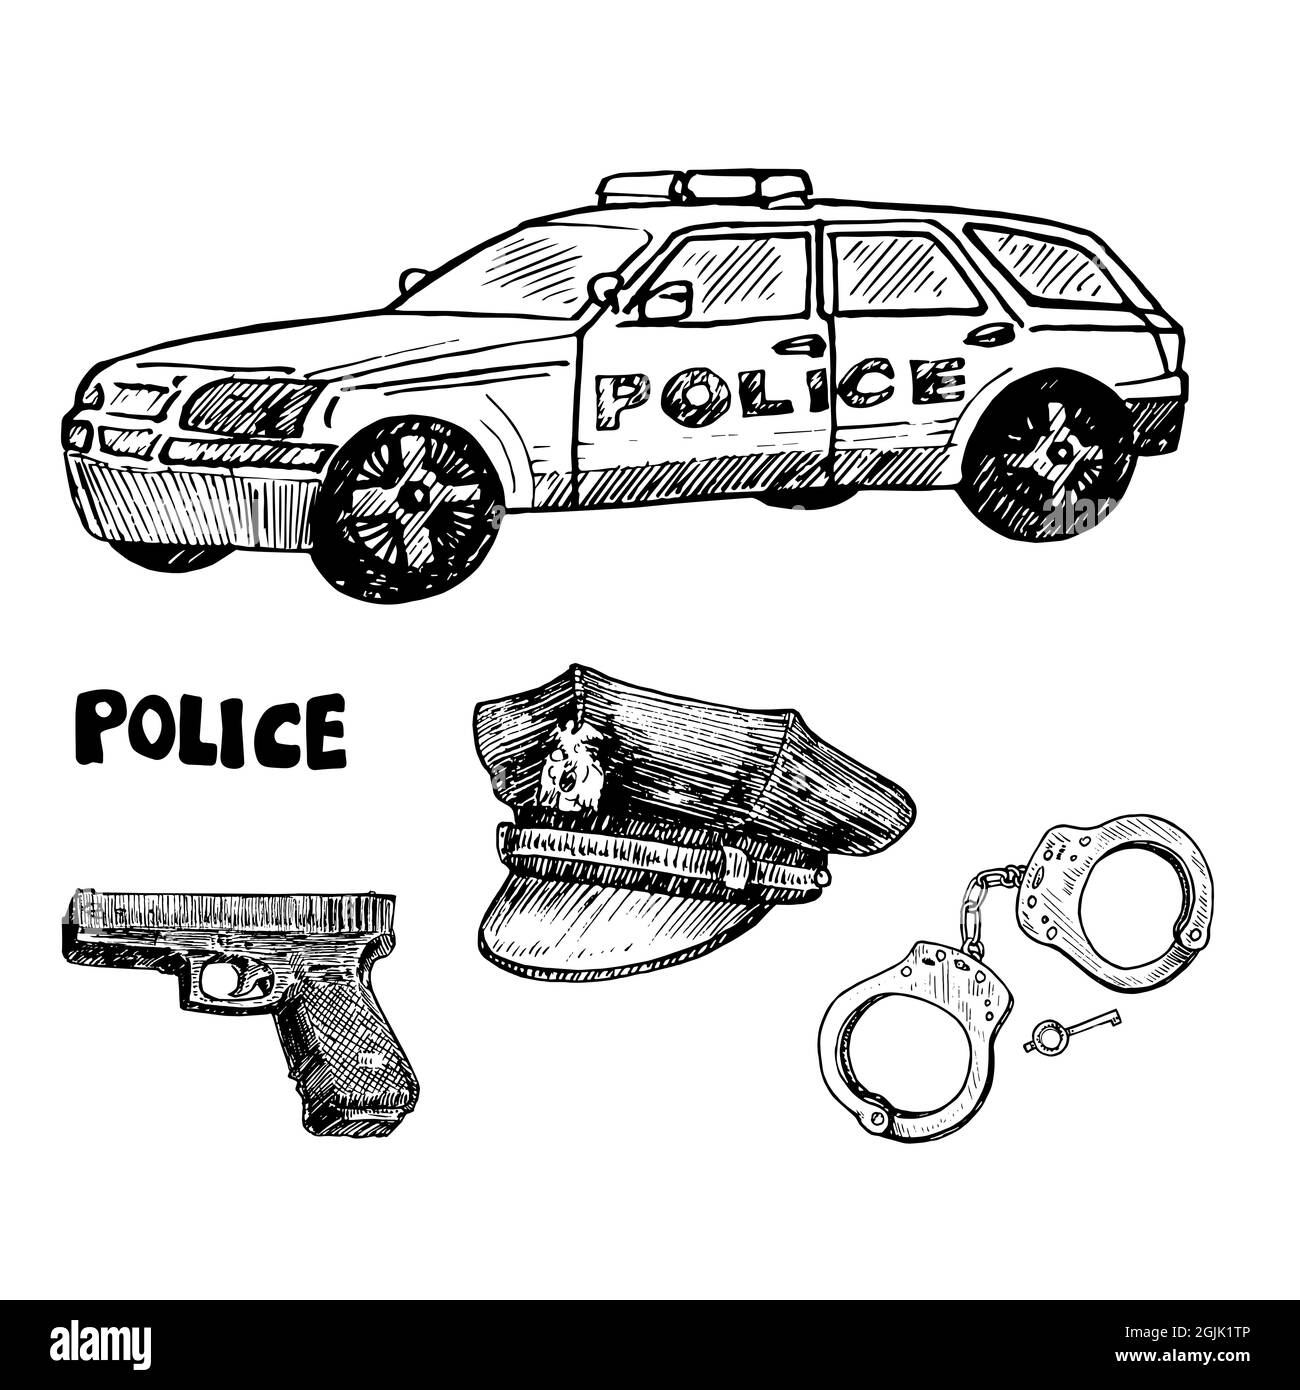 Police car, vintage US American police officer 8 point visor hat, Glock 22, Handcuffs and key,  gravure style ink drawing illustration isolated Stock Photo